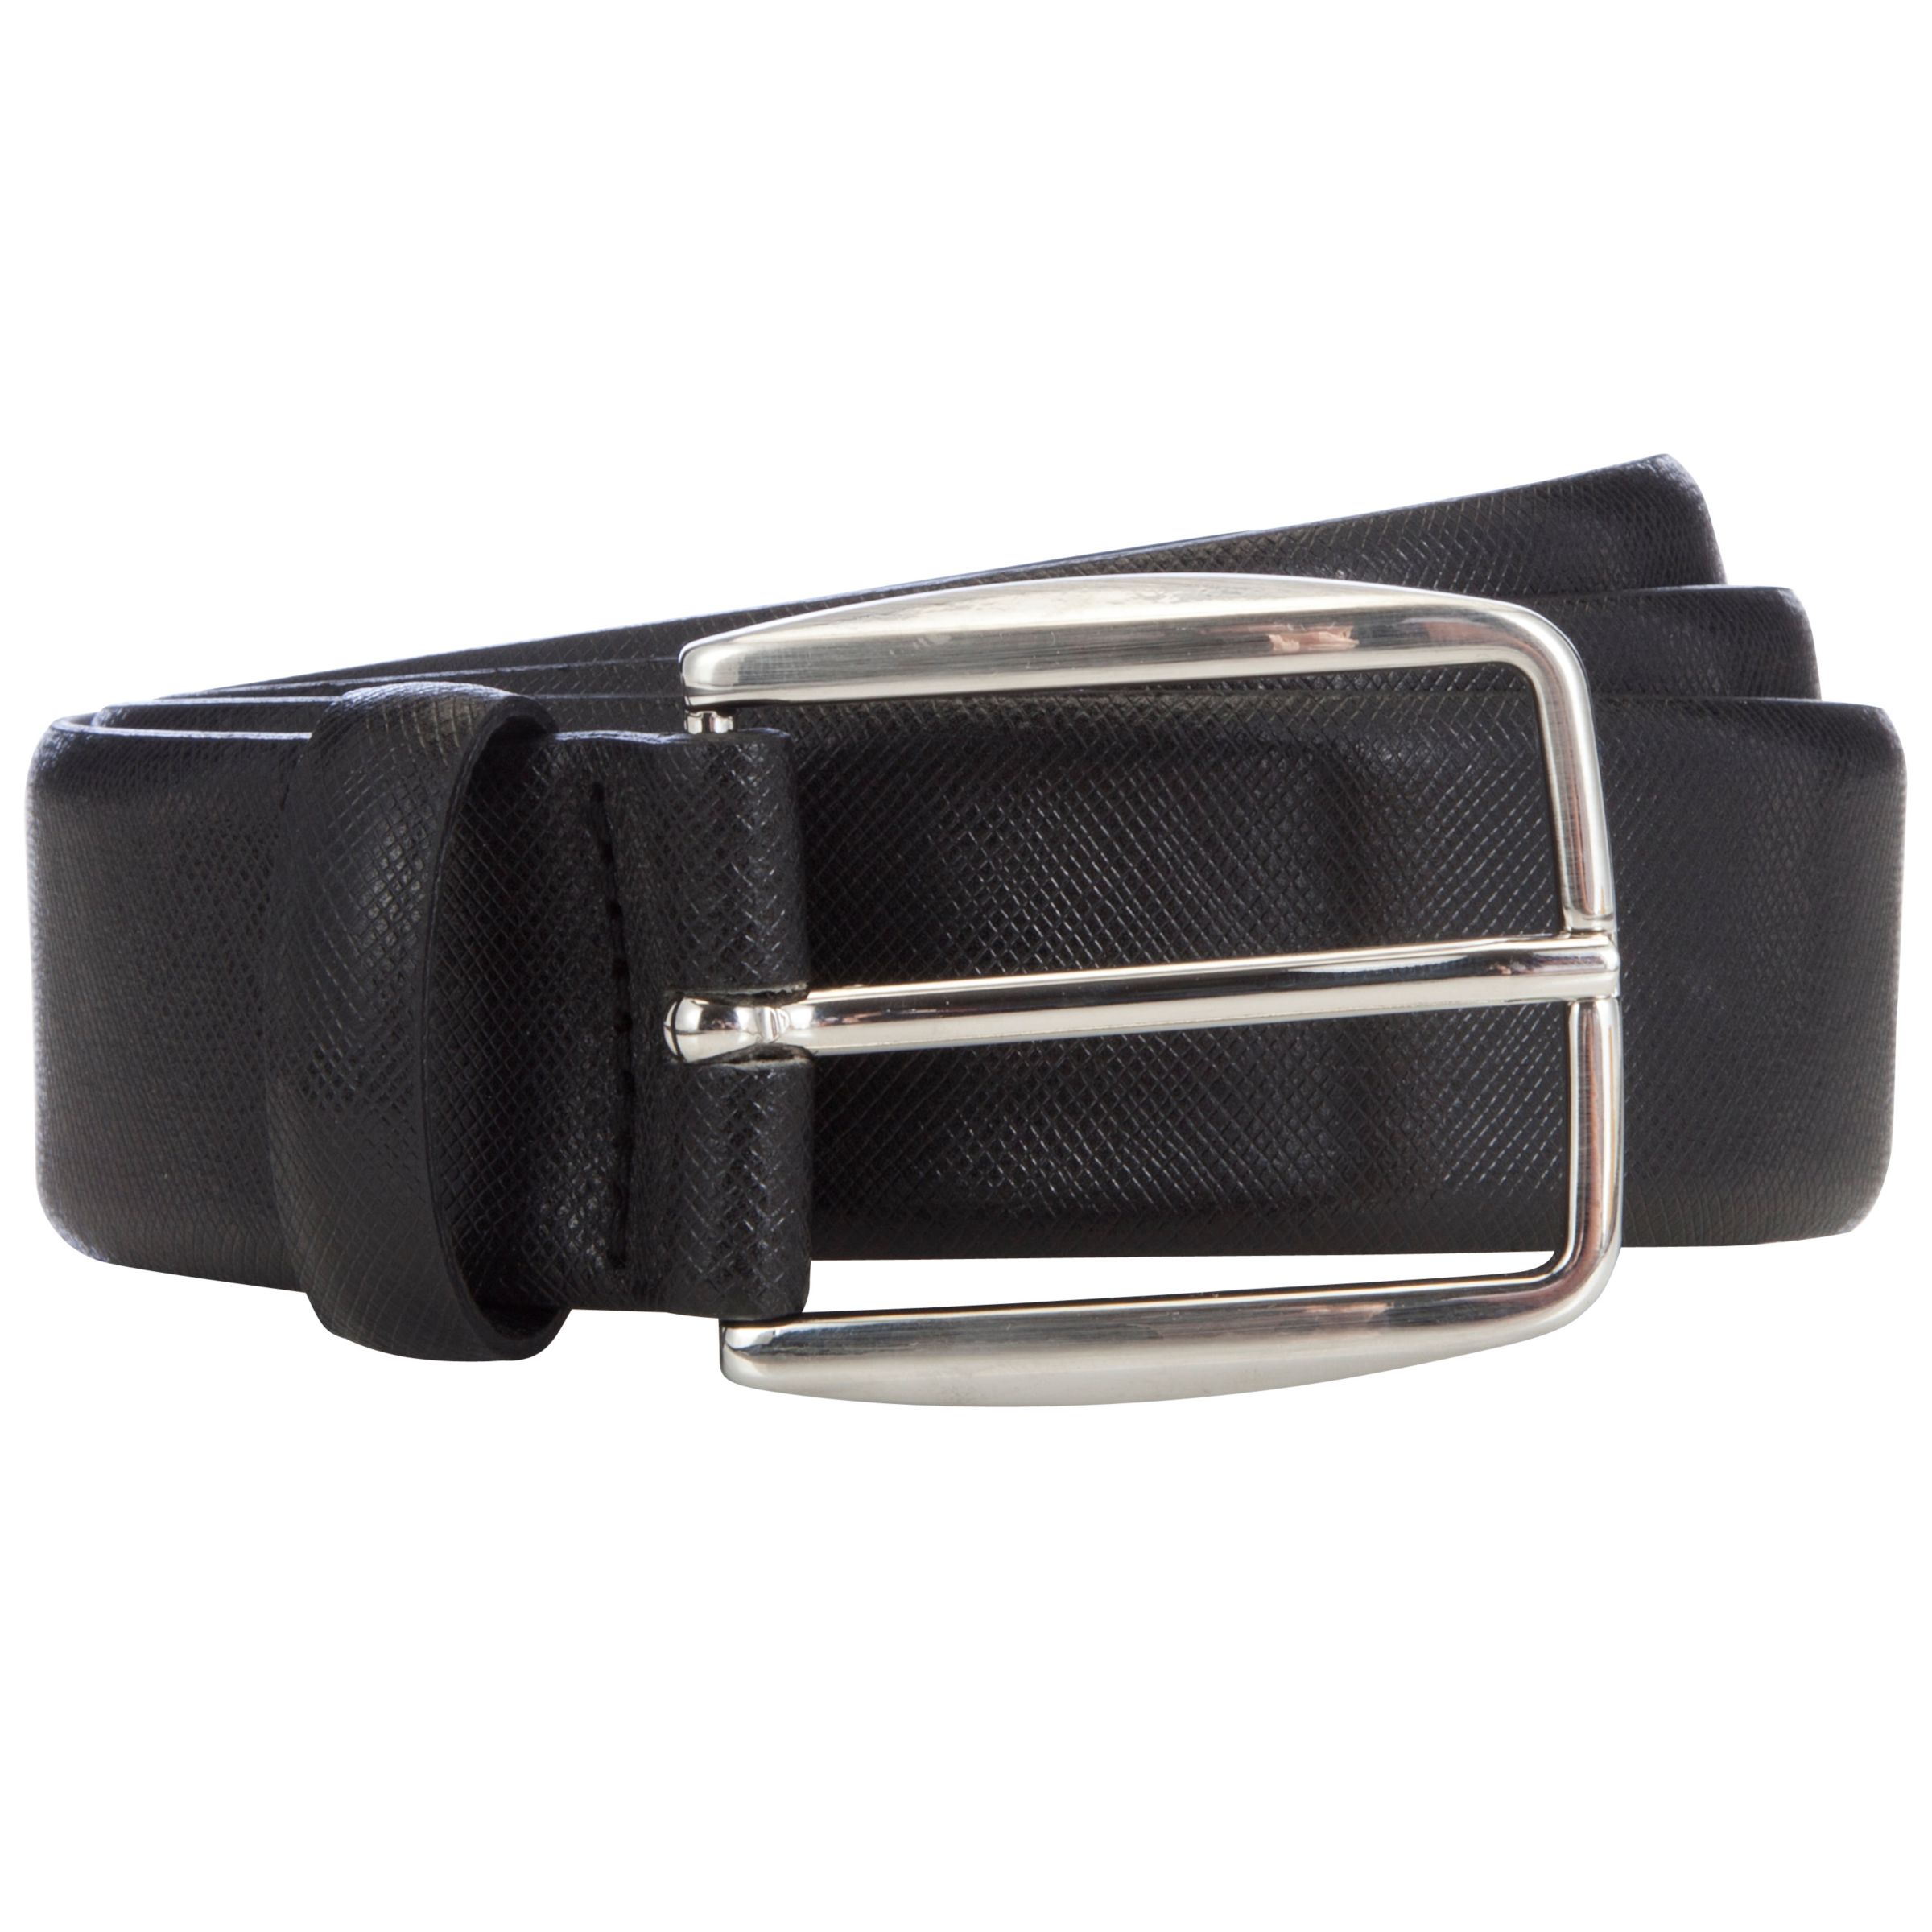 John Lewis & Partners Made in Italy Textured Leather Belt, Black